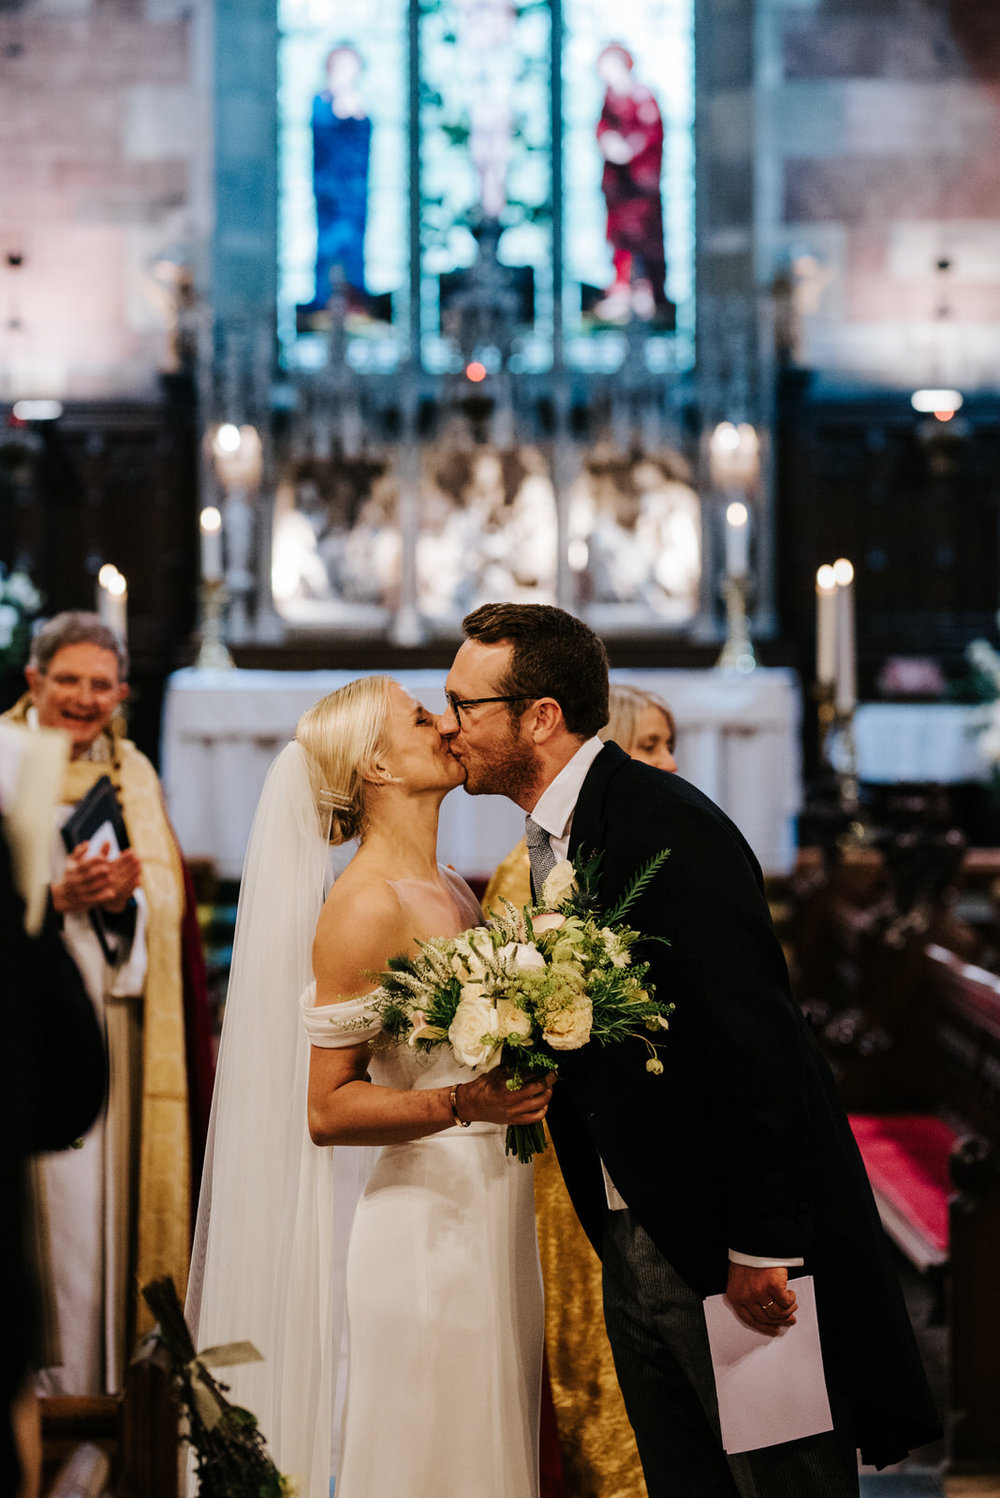  Bride and groom share first kiss before wedding ceremony ends 